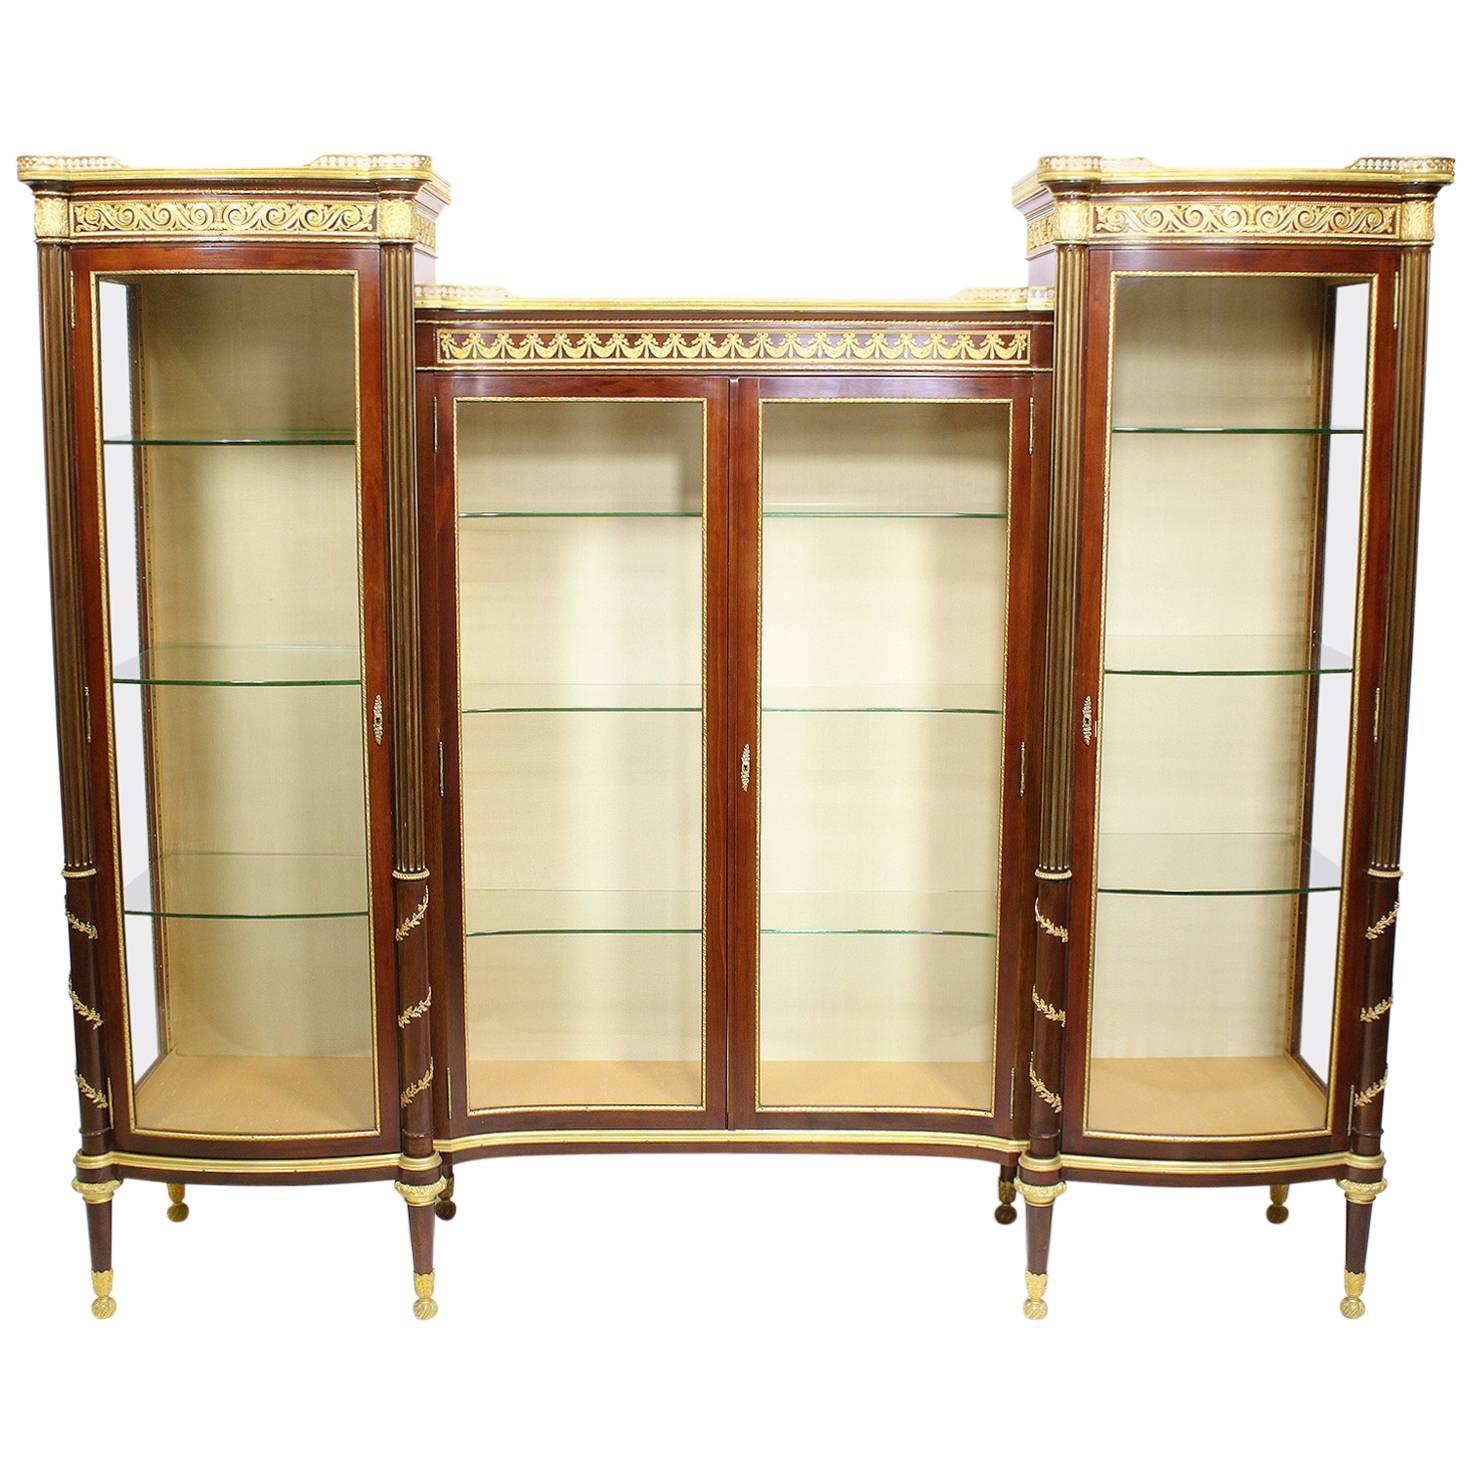 French 19th-20th Century Louis XVI Style Mahogany and Ormolu-Mounted Vitrine For Sale